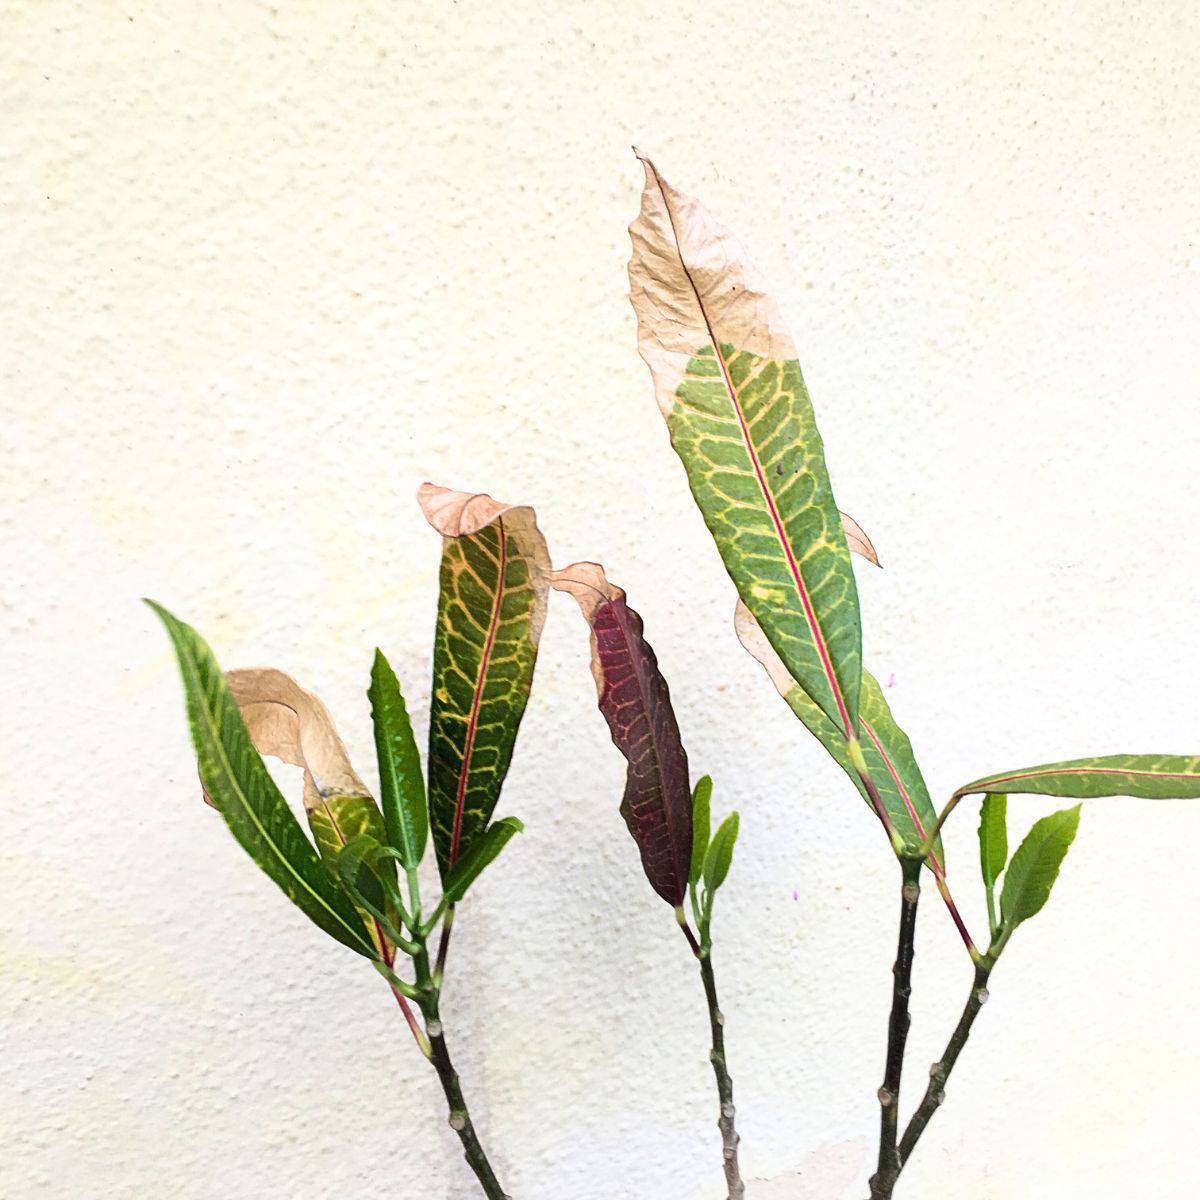 croton leaves turning white initial signs